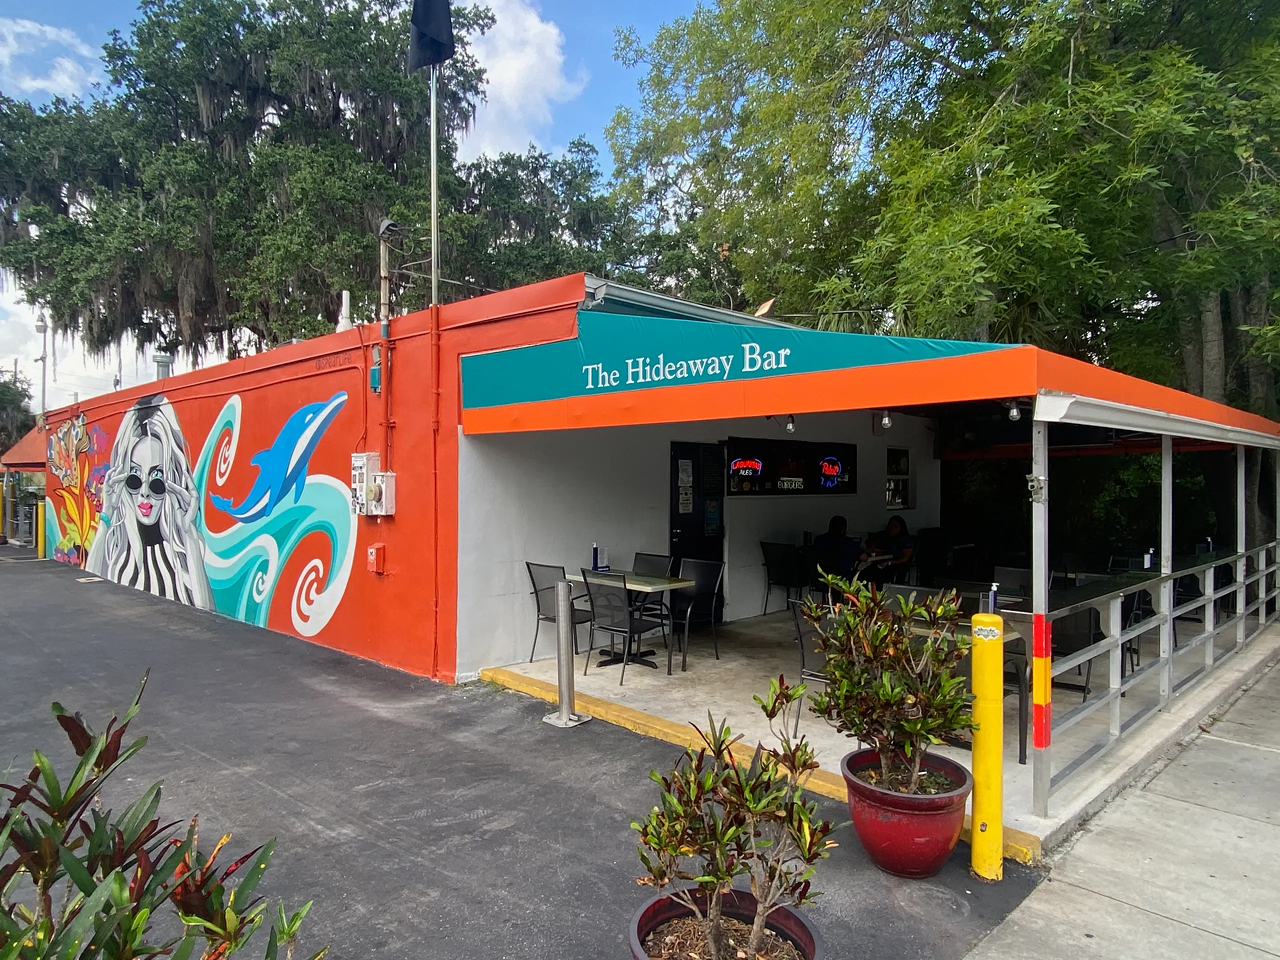 The Hideaway Bar516 Virginia Dr.This dive with a breezy patio has been a consistent presence for decades. New development in the area means that their home on Virginia drive might soon shuffle to a new spot across the street. Take in that hard-won essence while you can.